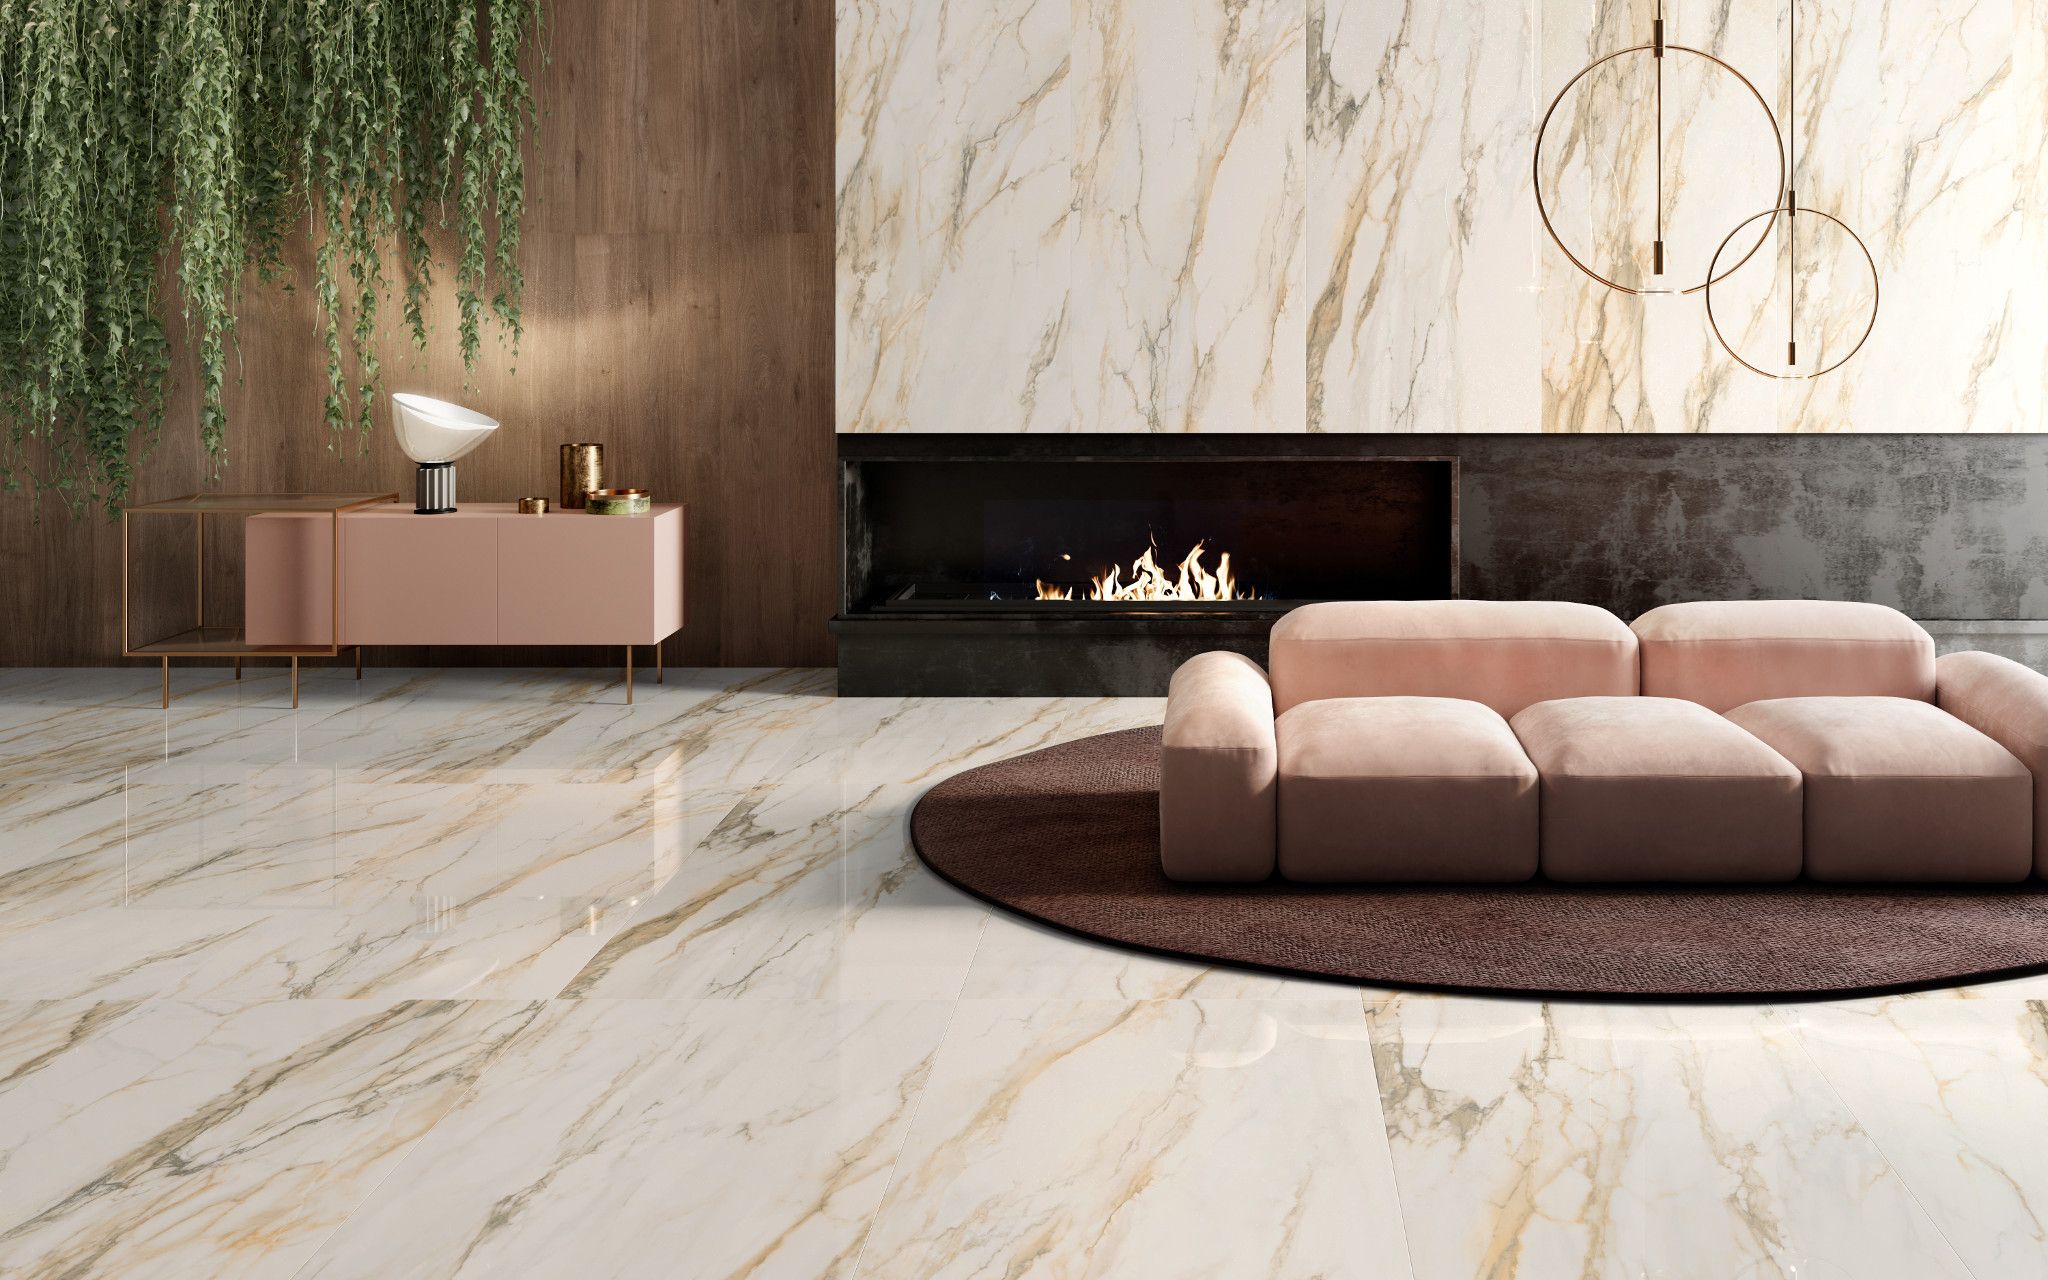 Tru Marmi comes from a curated selection of the most valuable light marble, reproduced with the highest digital precision in porcelain.